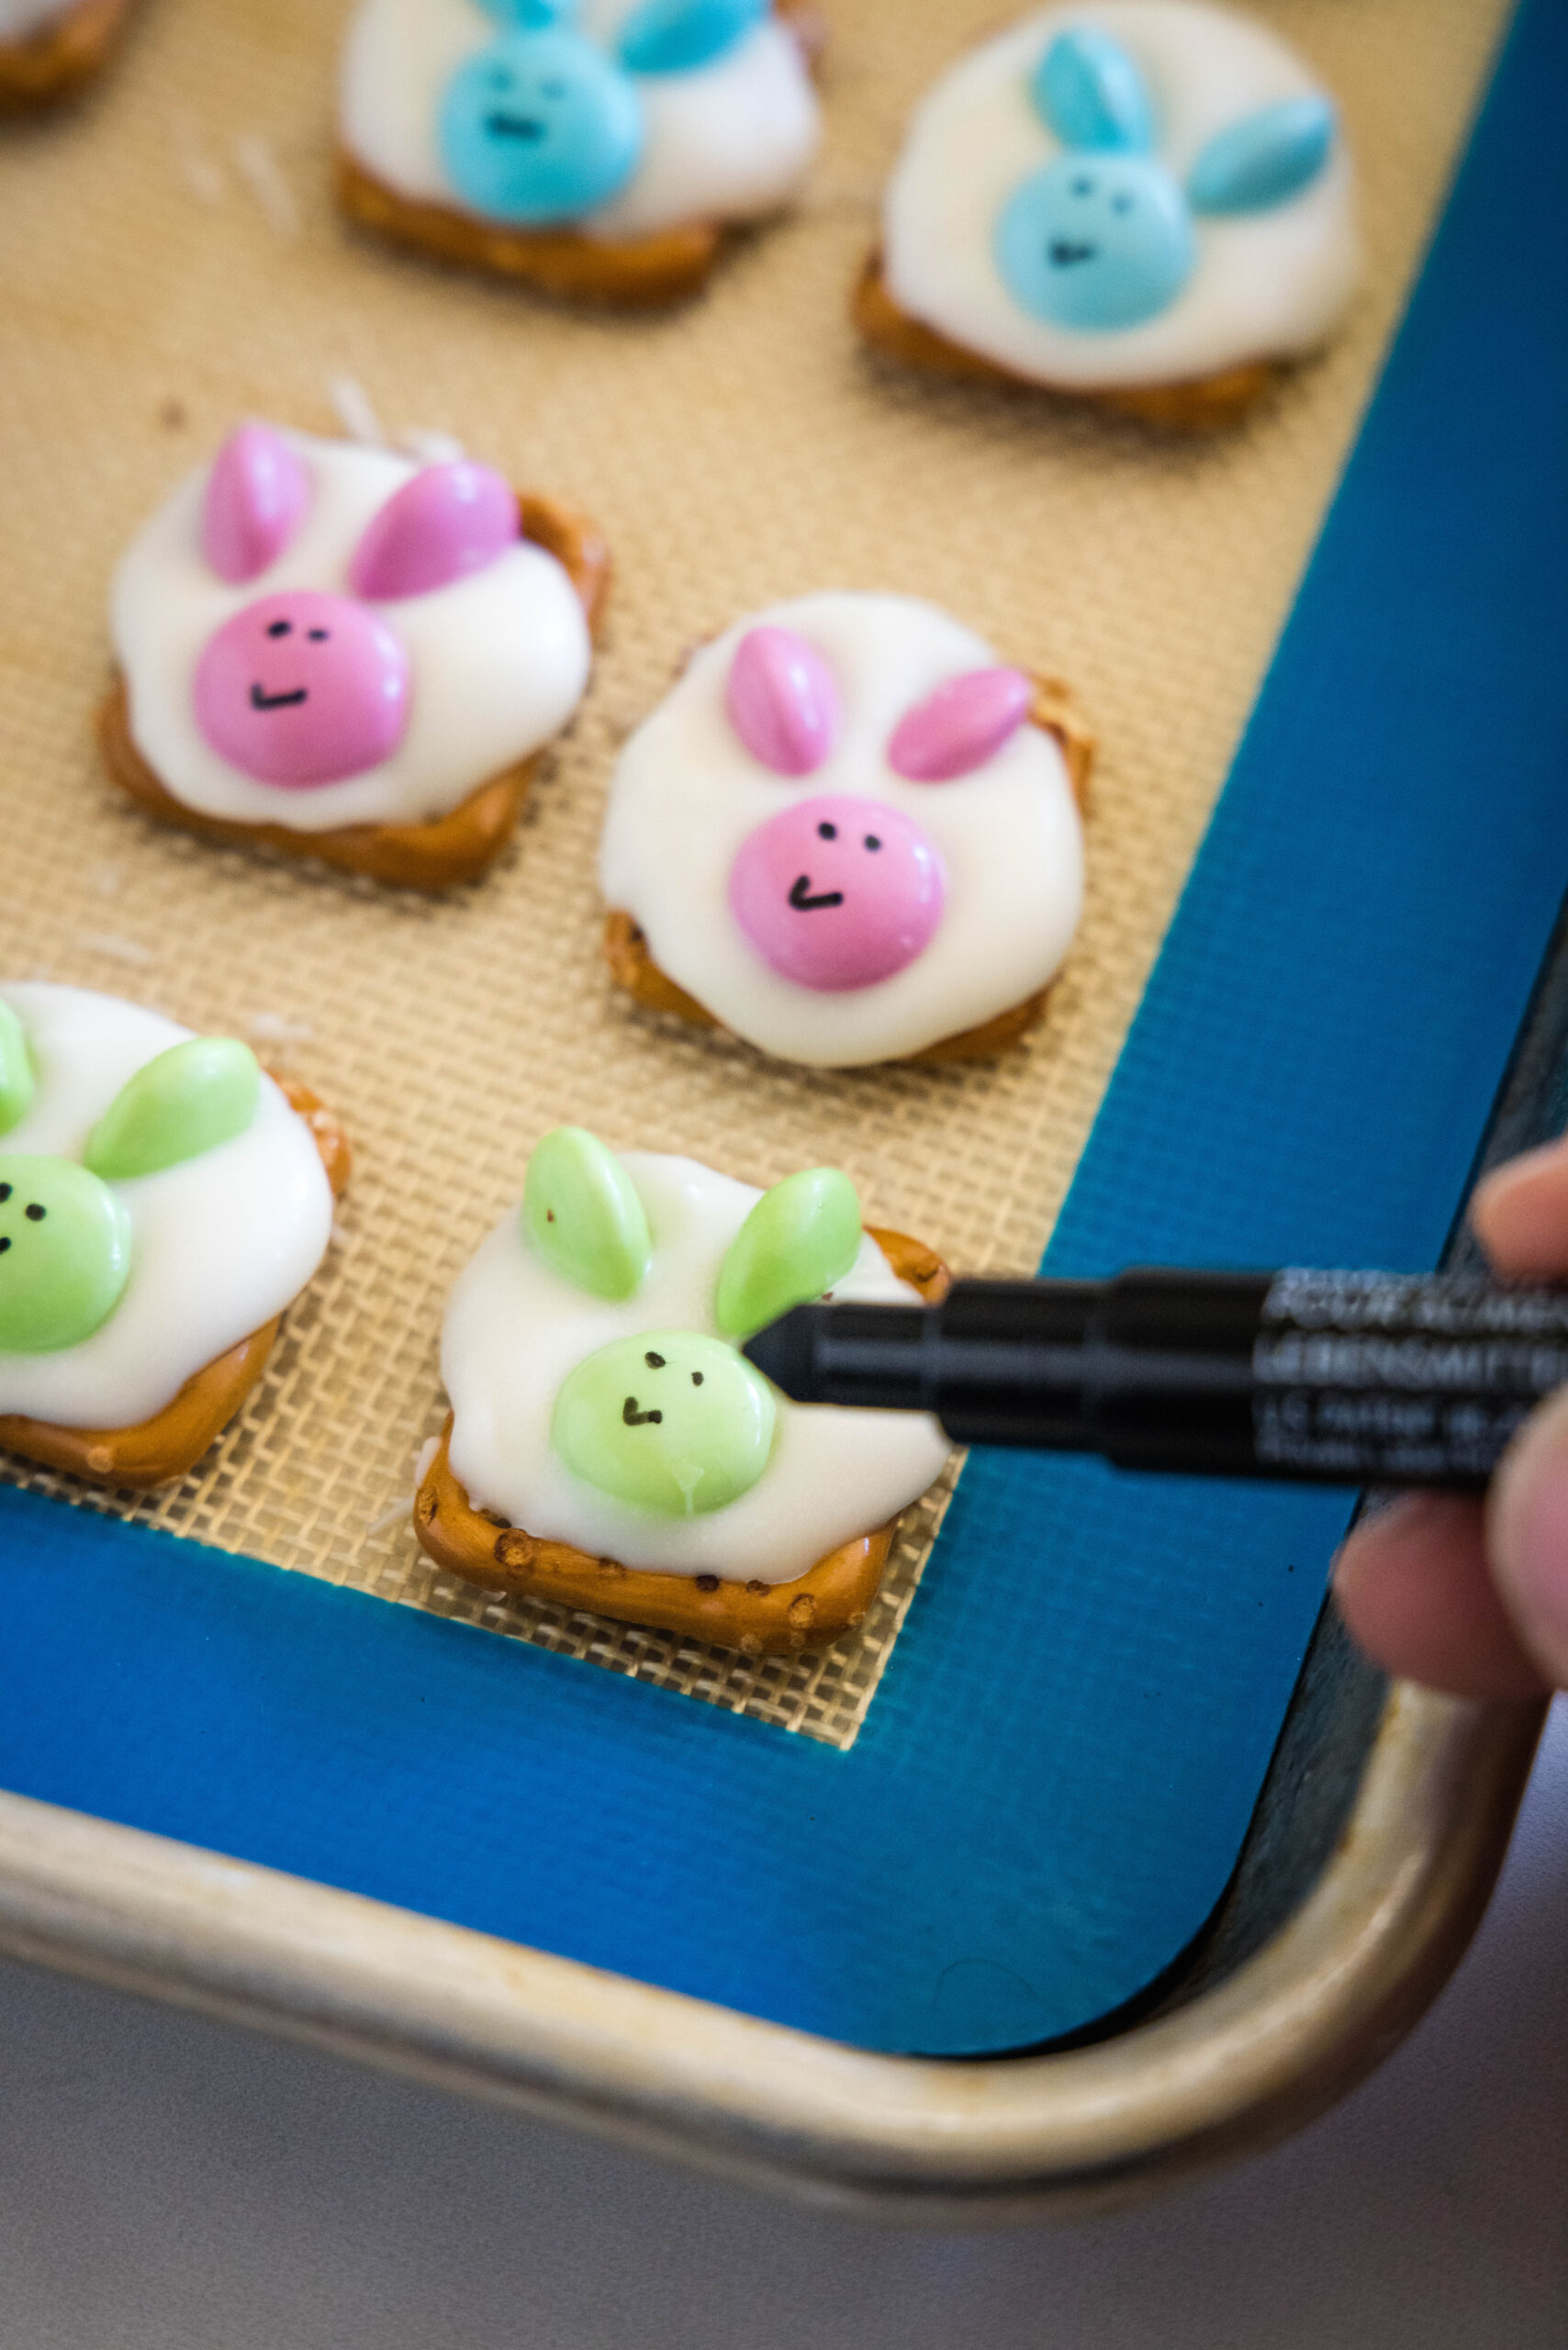 using the marker to draw faces on the pretzel bunnies